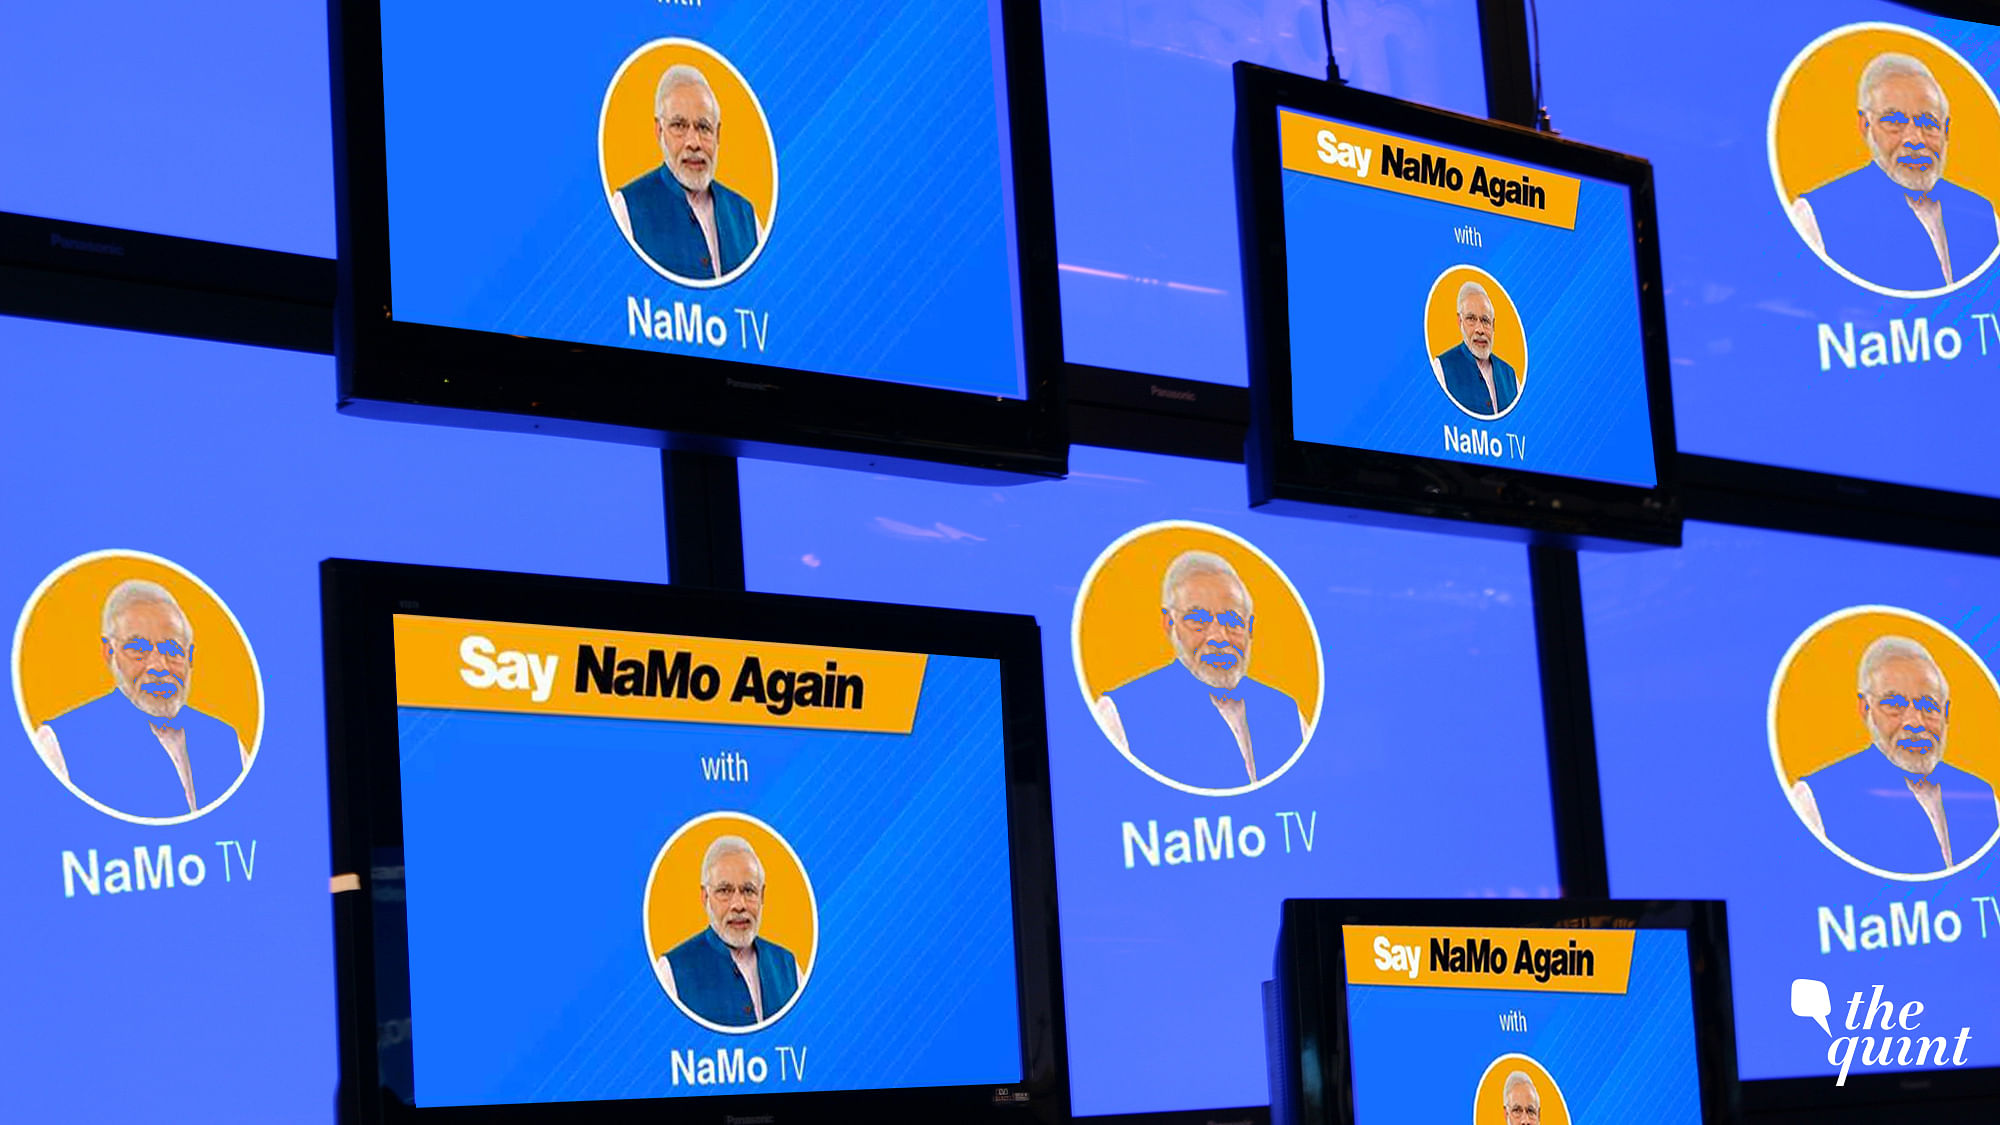 Since its launch, NaMo TV has sparked questions on its legality and ownership.